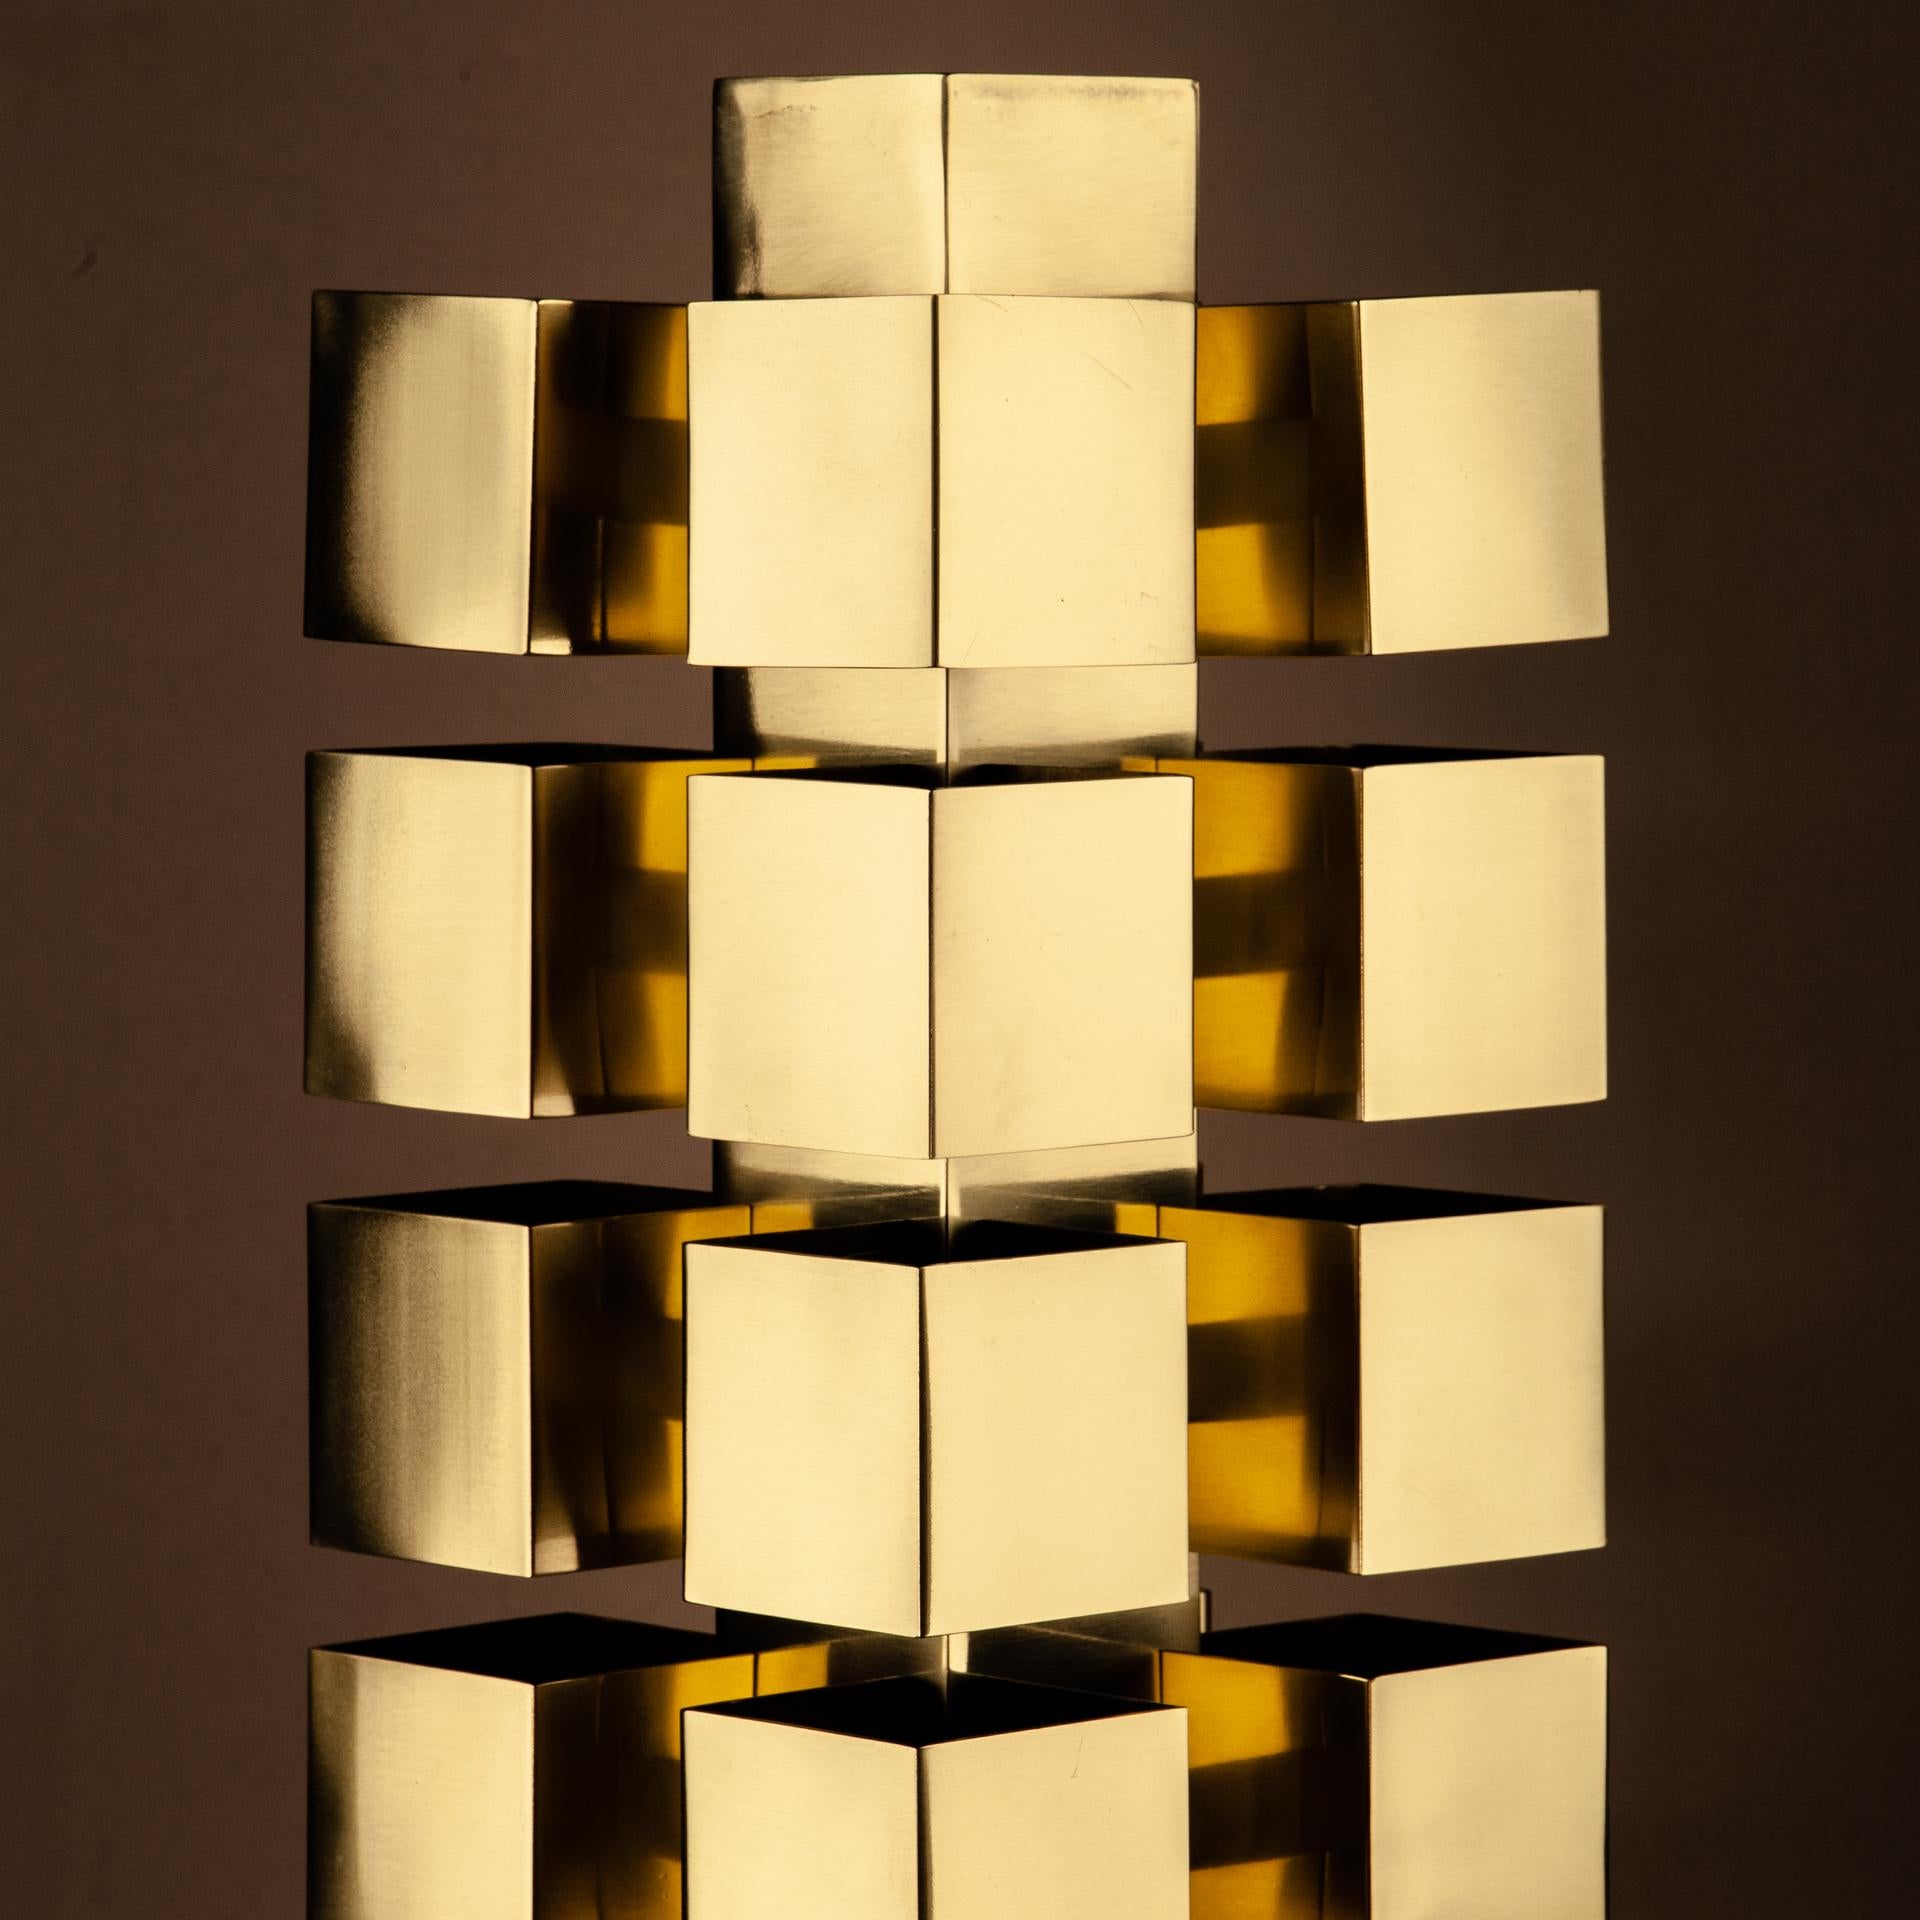 Tetris table lamp from Selezioni Domus Firenze.
Dramatic construction of cubes of solid, from which comes the name Tetris.
Lights comes from 4 LED stripes for a total of 5W so the light comes uniformely from every brass cube.

Selezioni Domus